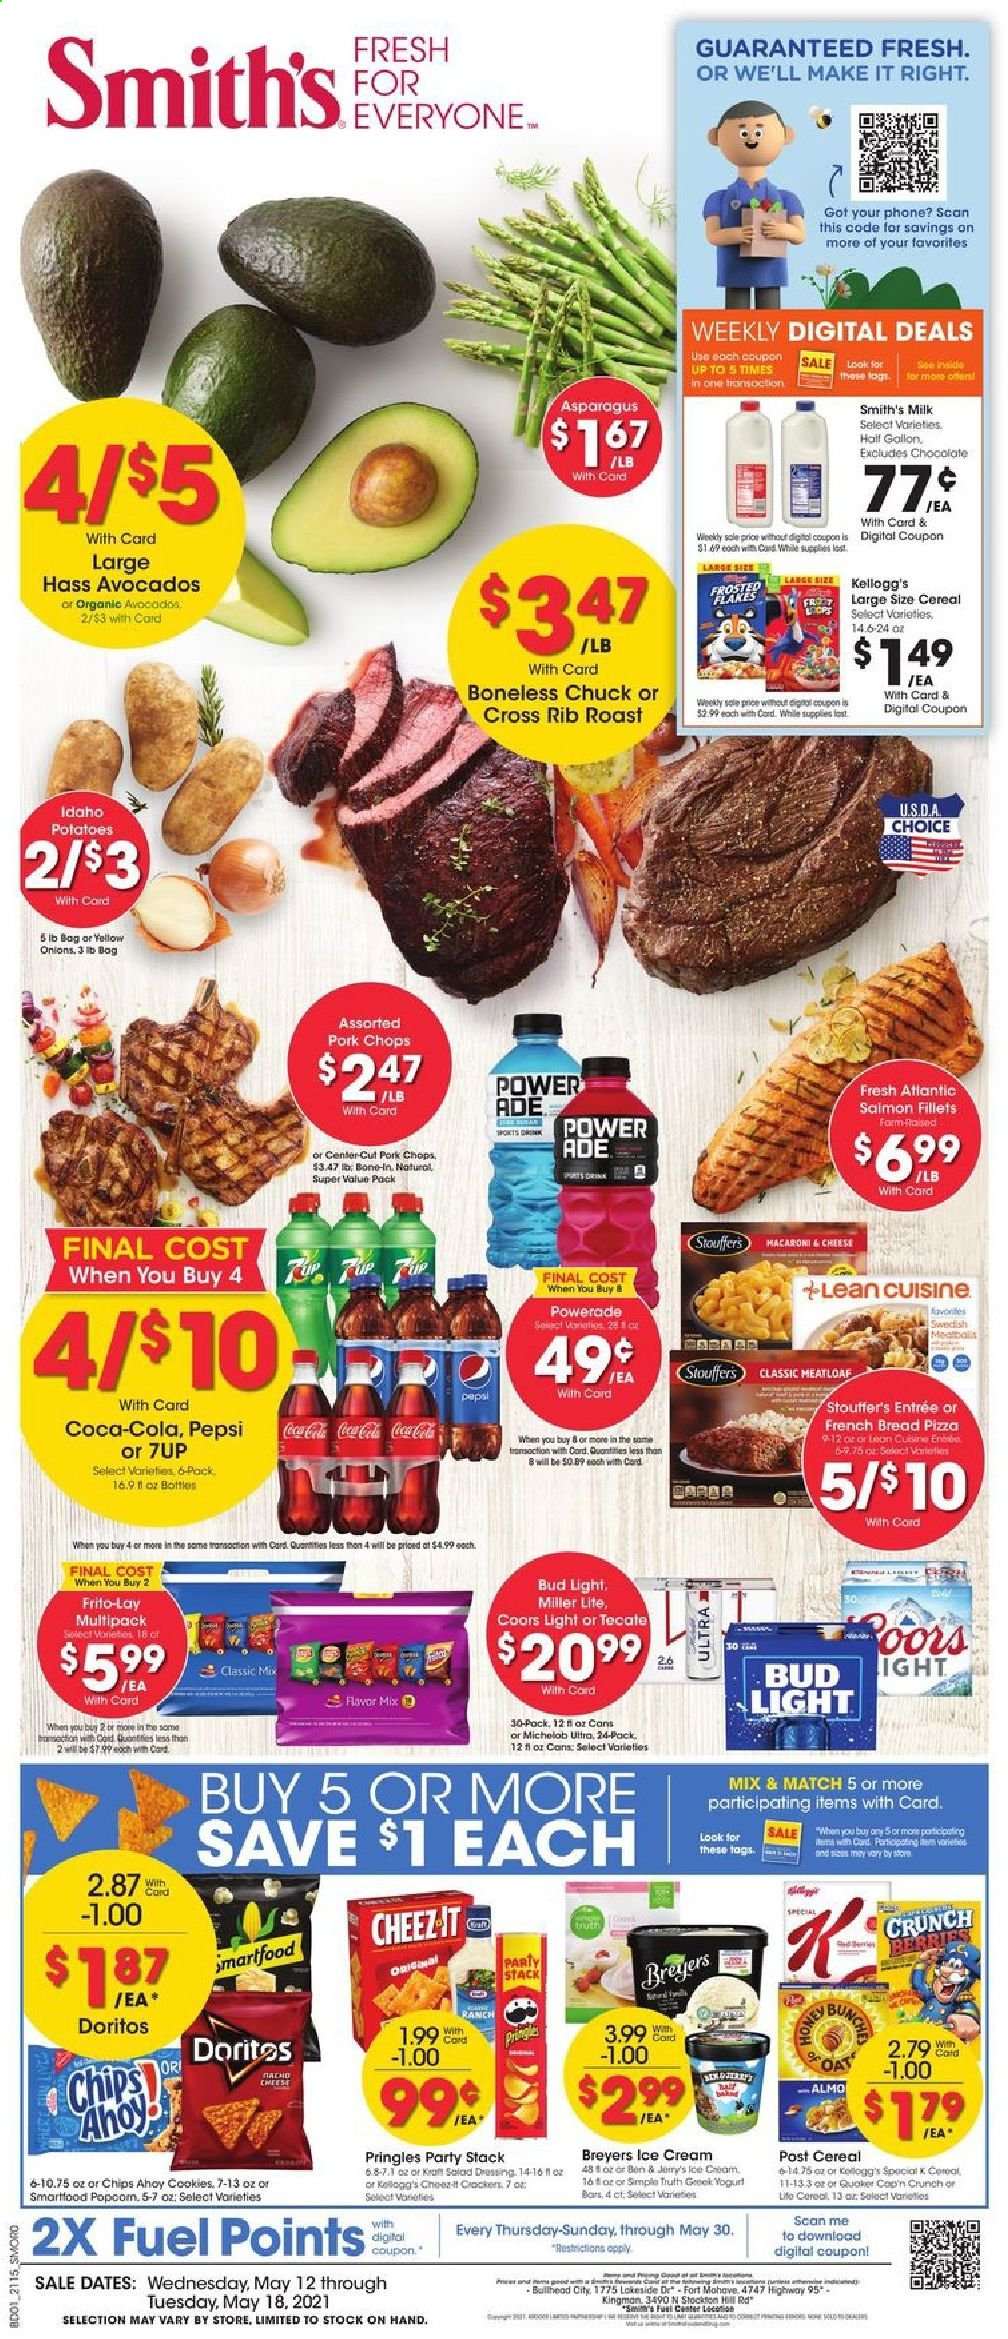 thumbnail - Smith's Flyer - 05/12/2021 - 05/18/2021 - Sales products - bread, french bread, asparagus, potatoes, onion, avocado, pizza, meatloaf, Lean Cuisine, yoghurt, milk, ice cream, Stouffer's, cookies, crackers, Kellogg's, Doritos, Pringles, chips, Smith's, Frito-Lay, oats, cereals, Frosted Flakes, salad dressing, dressing, Coca-Cola, Powerade, Pepsi, 7UP, beer, Miller Lite, Coors, Michelob, Bud Light, pork chops, pork meat. Page 1.